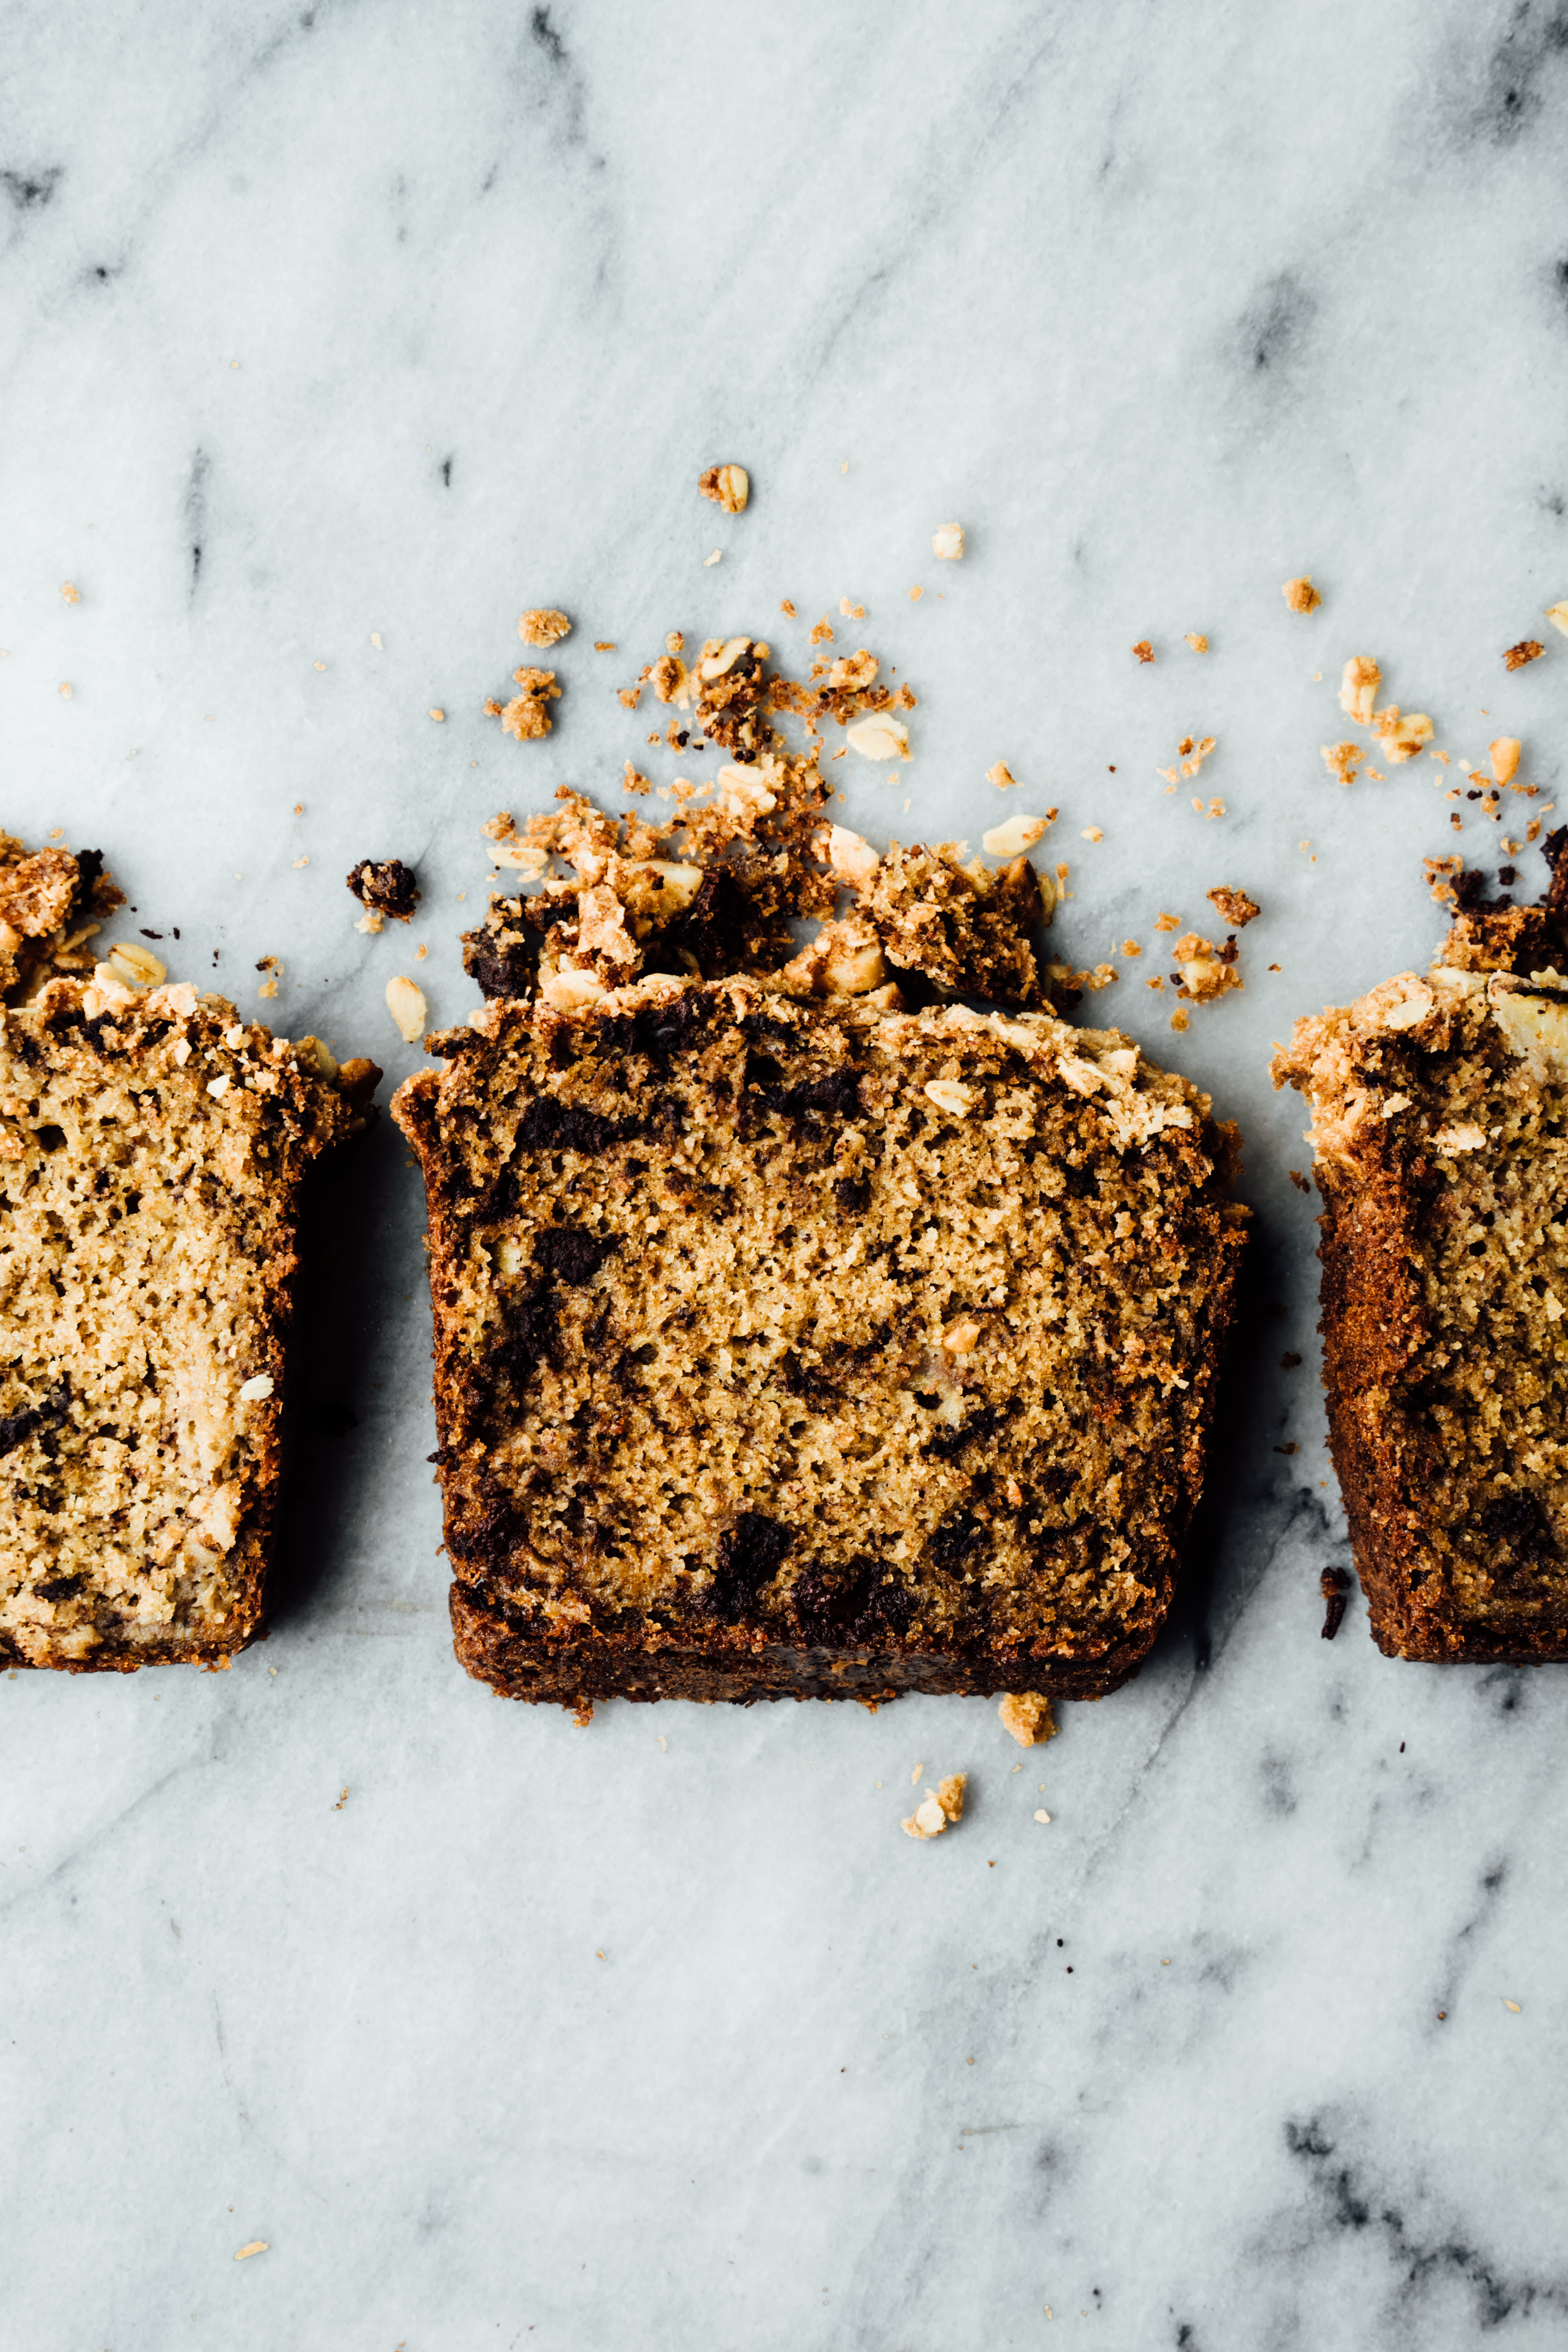 Chocolate Chip Banana Bread with Coconut Macadamia Nut Streusel | TENDING the TABLE